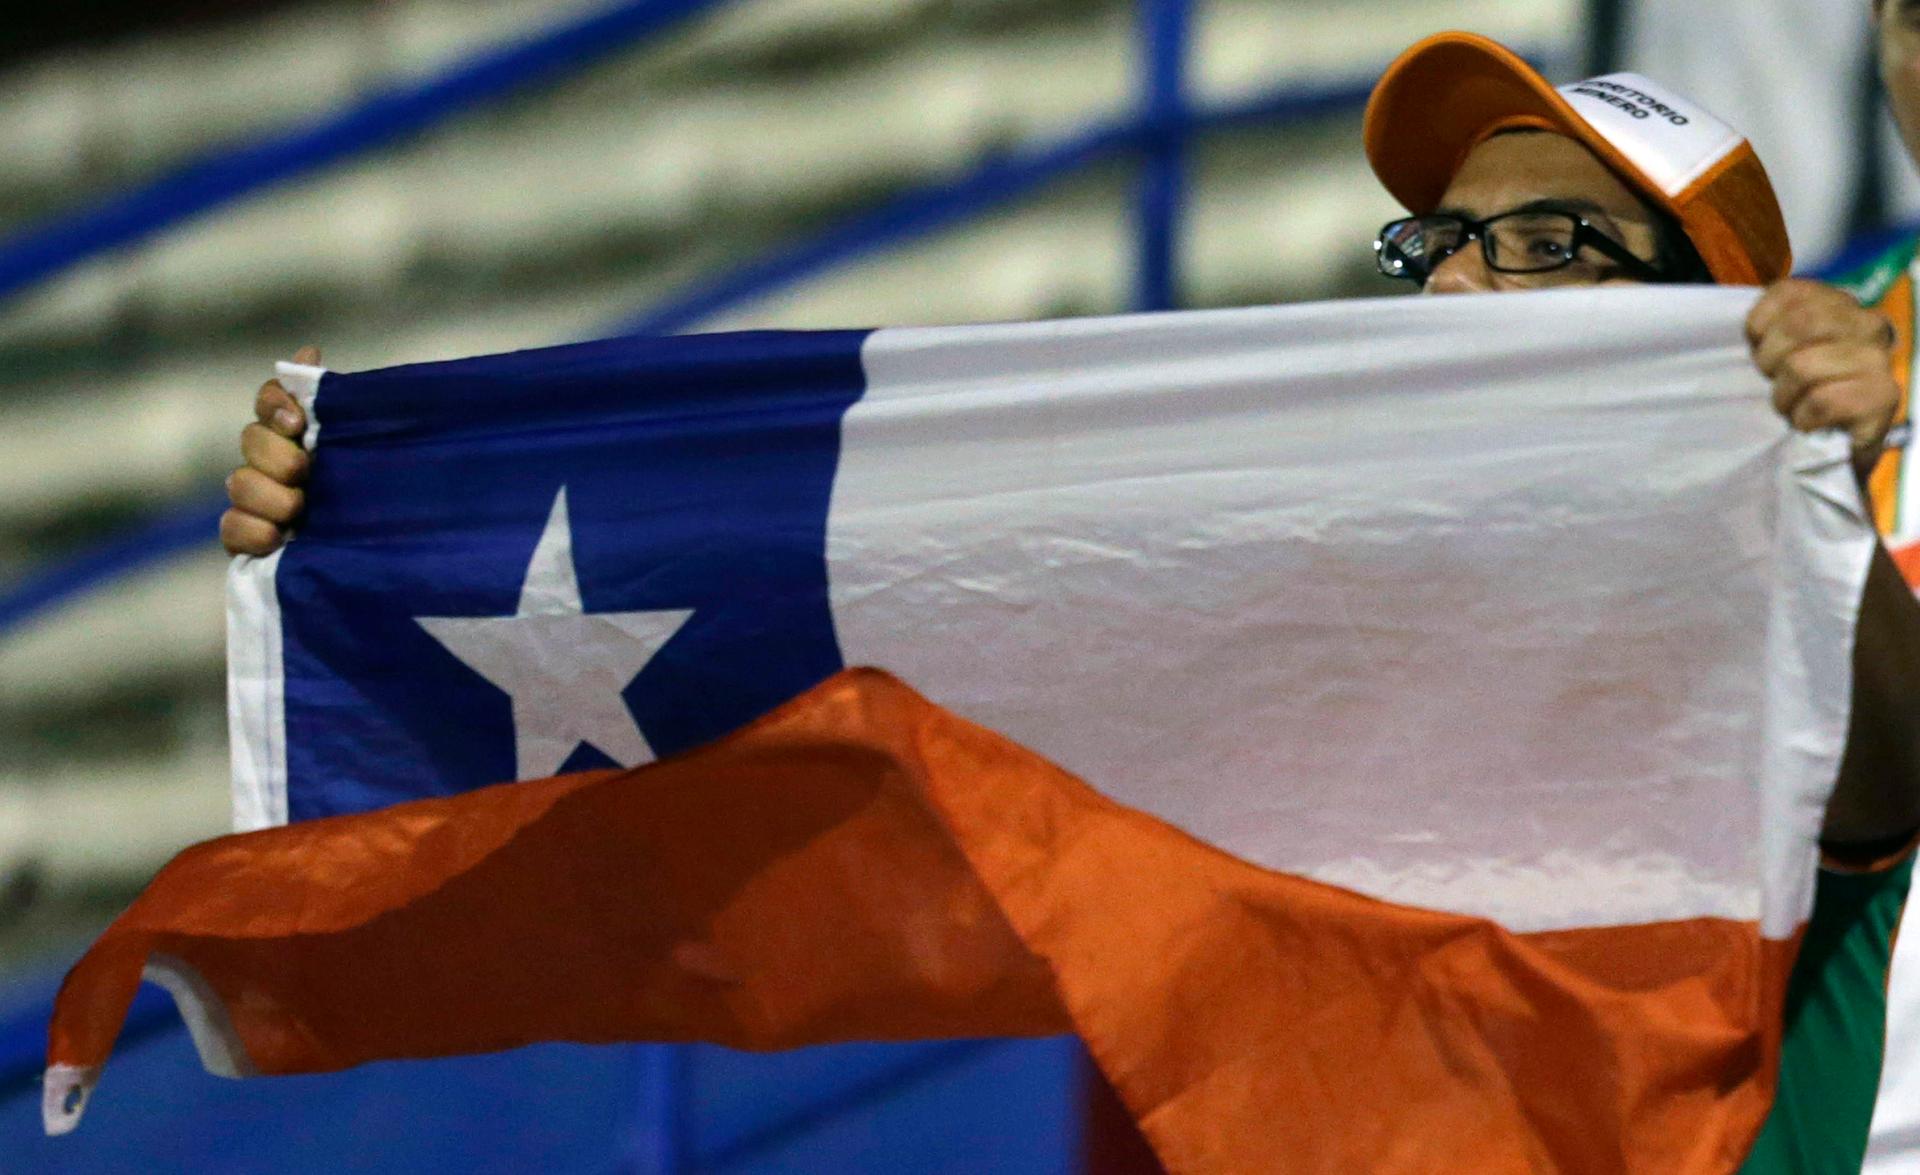 A fan of Chile's Cobresal holds a Chilean national flag before his team plays against Paraguay's General Diaz in their Copa Sudamericana soccer match in Luque near Asuncion, August 20, 2014.